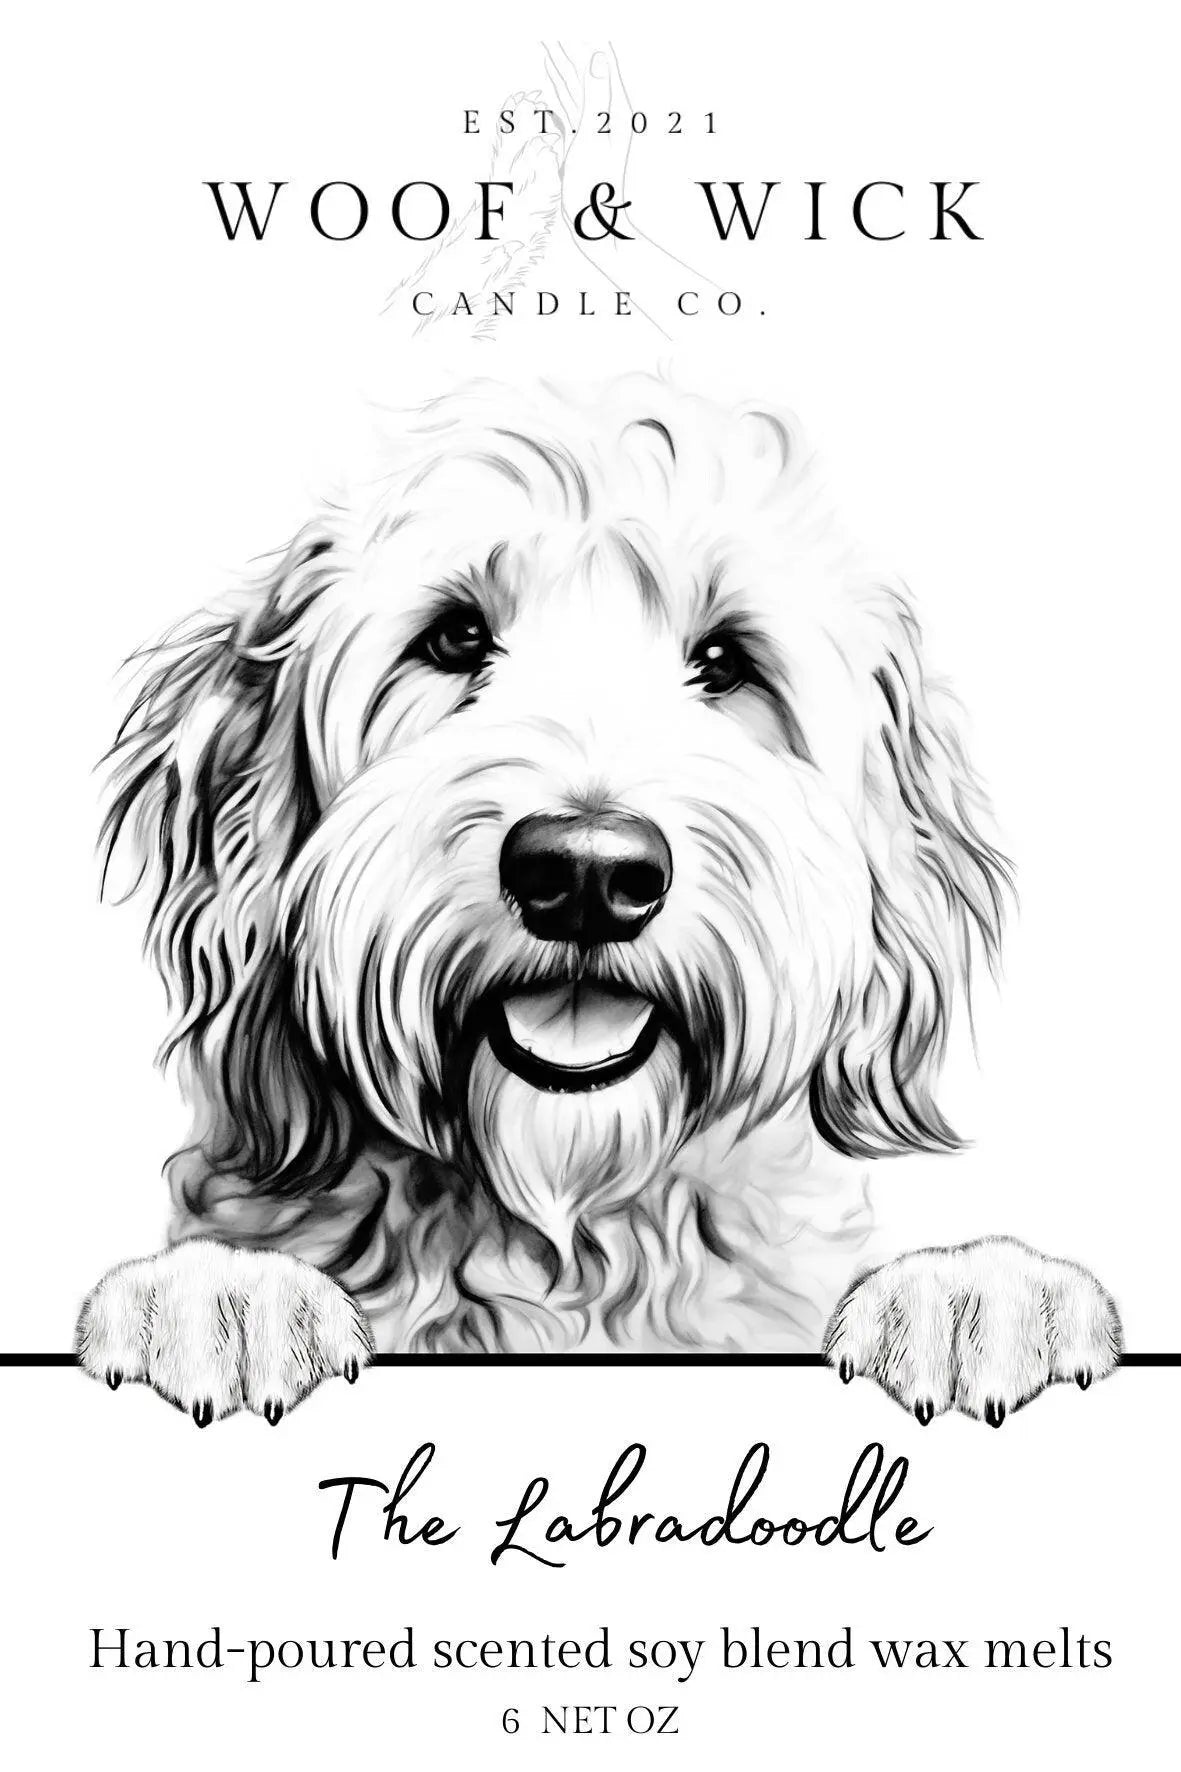 The Labradoodle - Personalized Dog Scoopable Best Scented Wax Melts for Wax Warmers - Woof & Wick Candle Co.